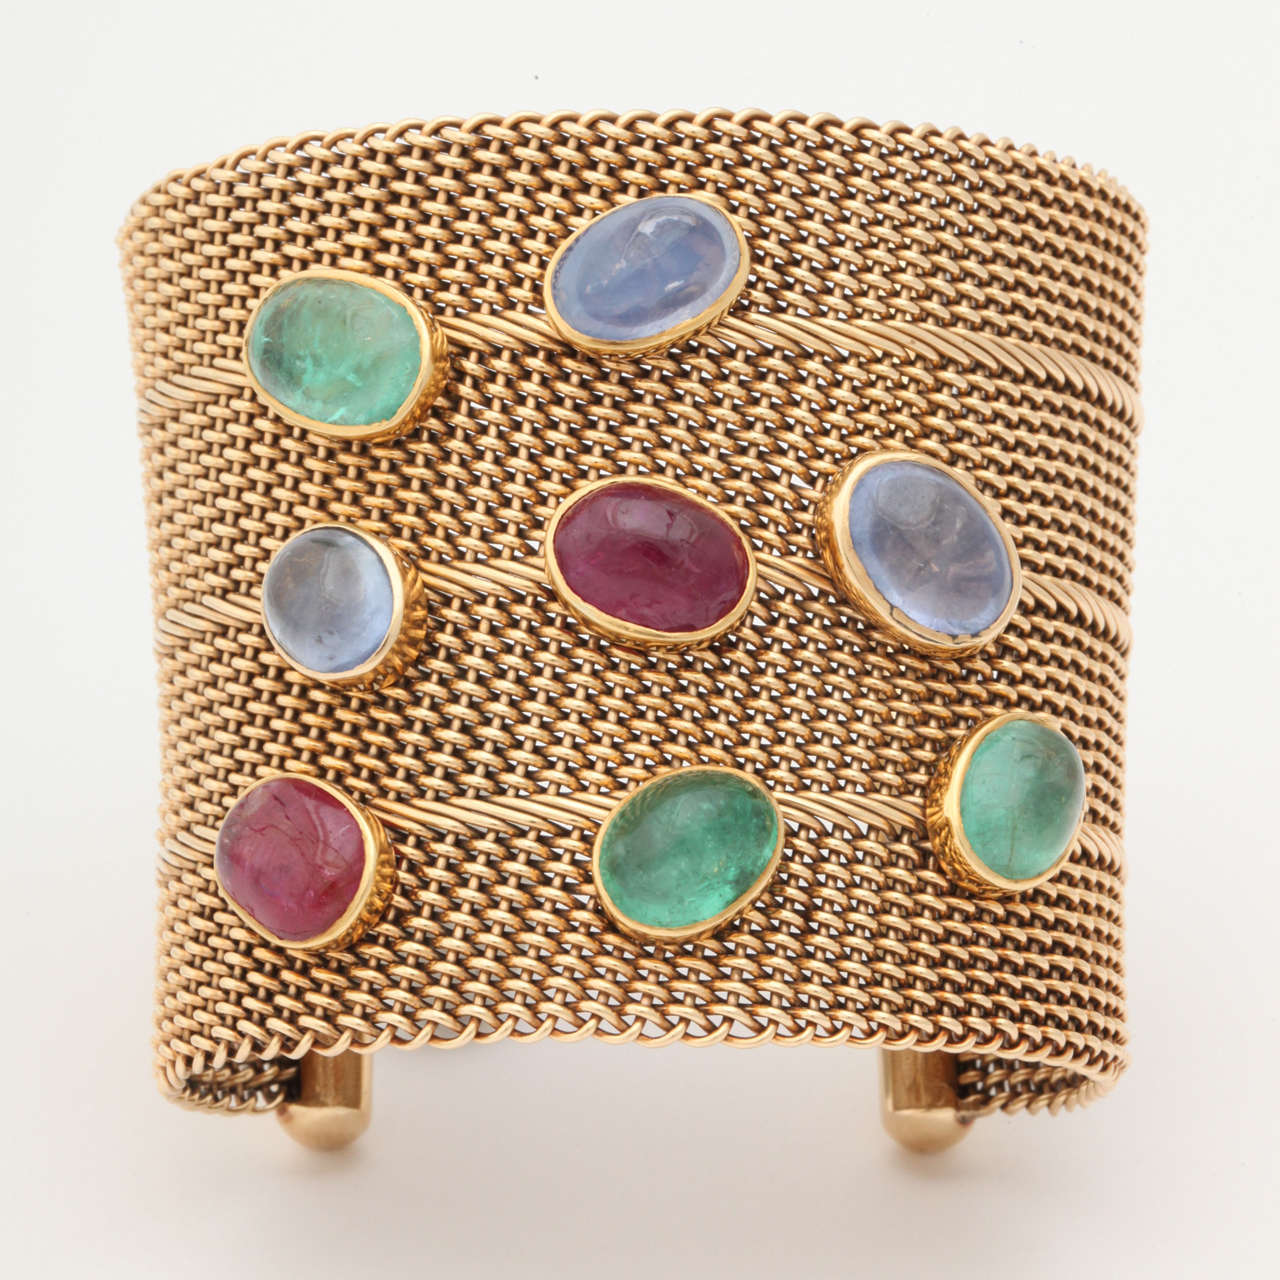 14 KT yellow Gold Heavy Large Open Cuff Mesh Bracelet Consisting of 8 Large Colored Stone Cabochon: 2 Rubies Weighing Approximately 10 Carats, 3 Cabochon Sapphires Weighing Approximately 15 Carats

American Made Circa 1950s